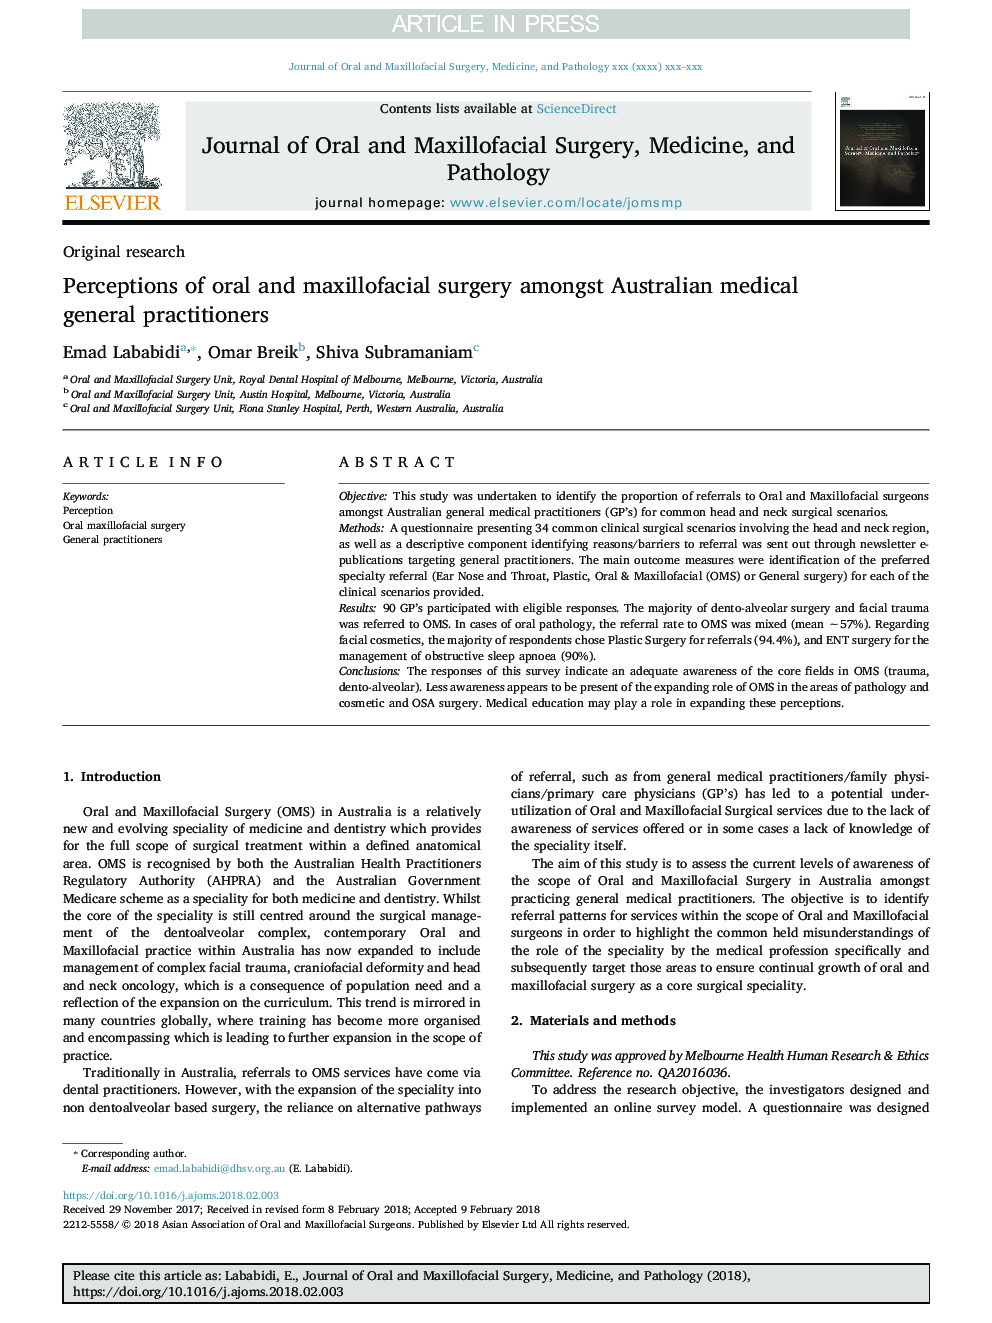 Perceptions of oral and maxillofacial surgery amongst Australian medical general practitioners